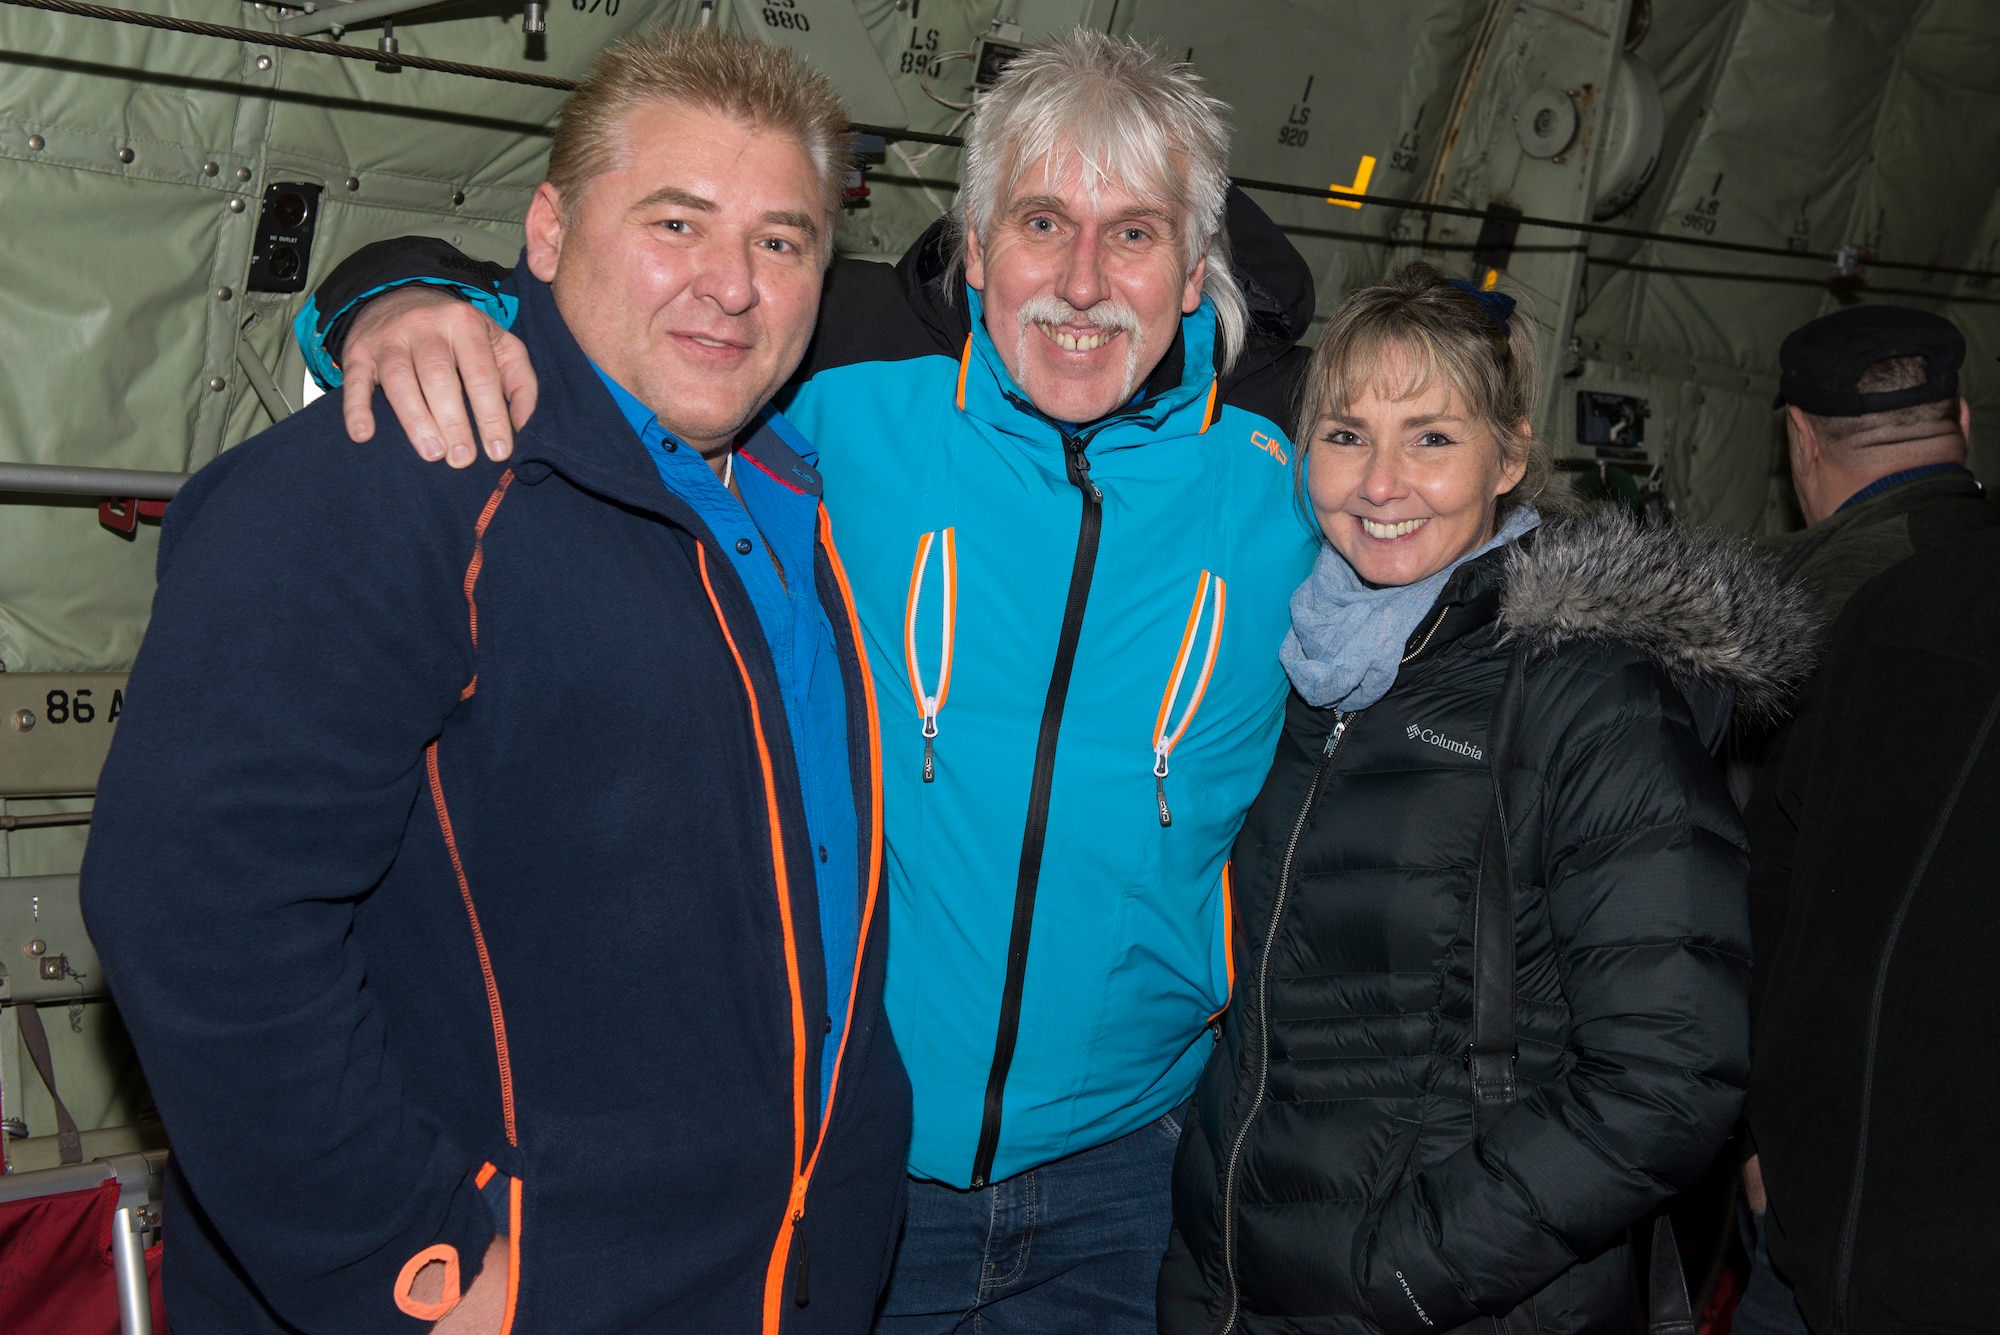 Volker Ernst, left, a 30-year length-of-service honoree, poses for a photo with his family inside a C-130J Hercules aircraft at Ramstein Air Base, Germany, Dec. 6, 2019. Ernst was one of more than 150 civil servants honored earlier in the day for long-standing employment with the U.S. government.  American and non-U.S. employees play a vital role in maintaining Ramstein Air Base’s mission and capabilities.